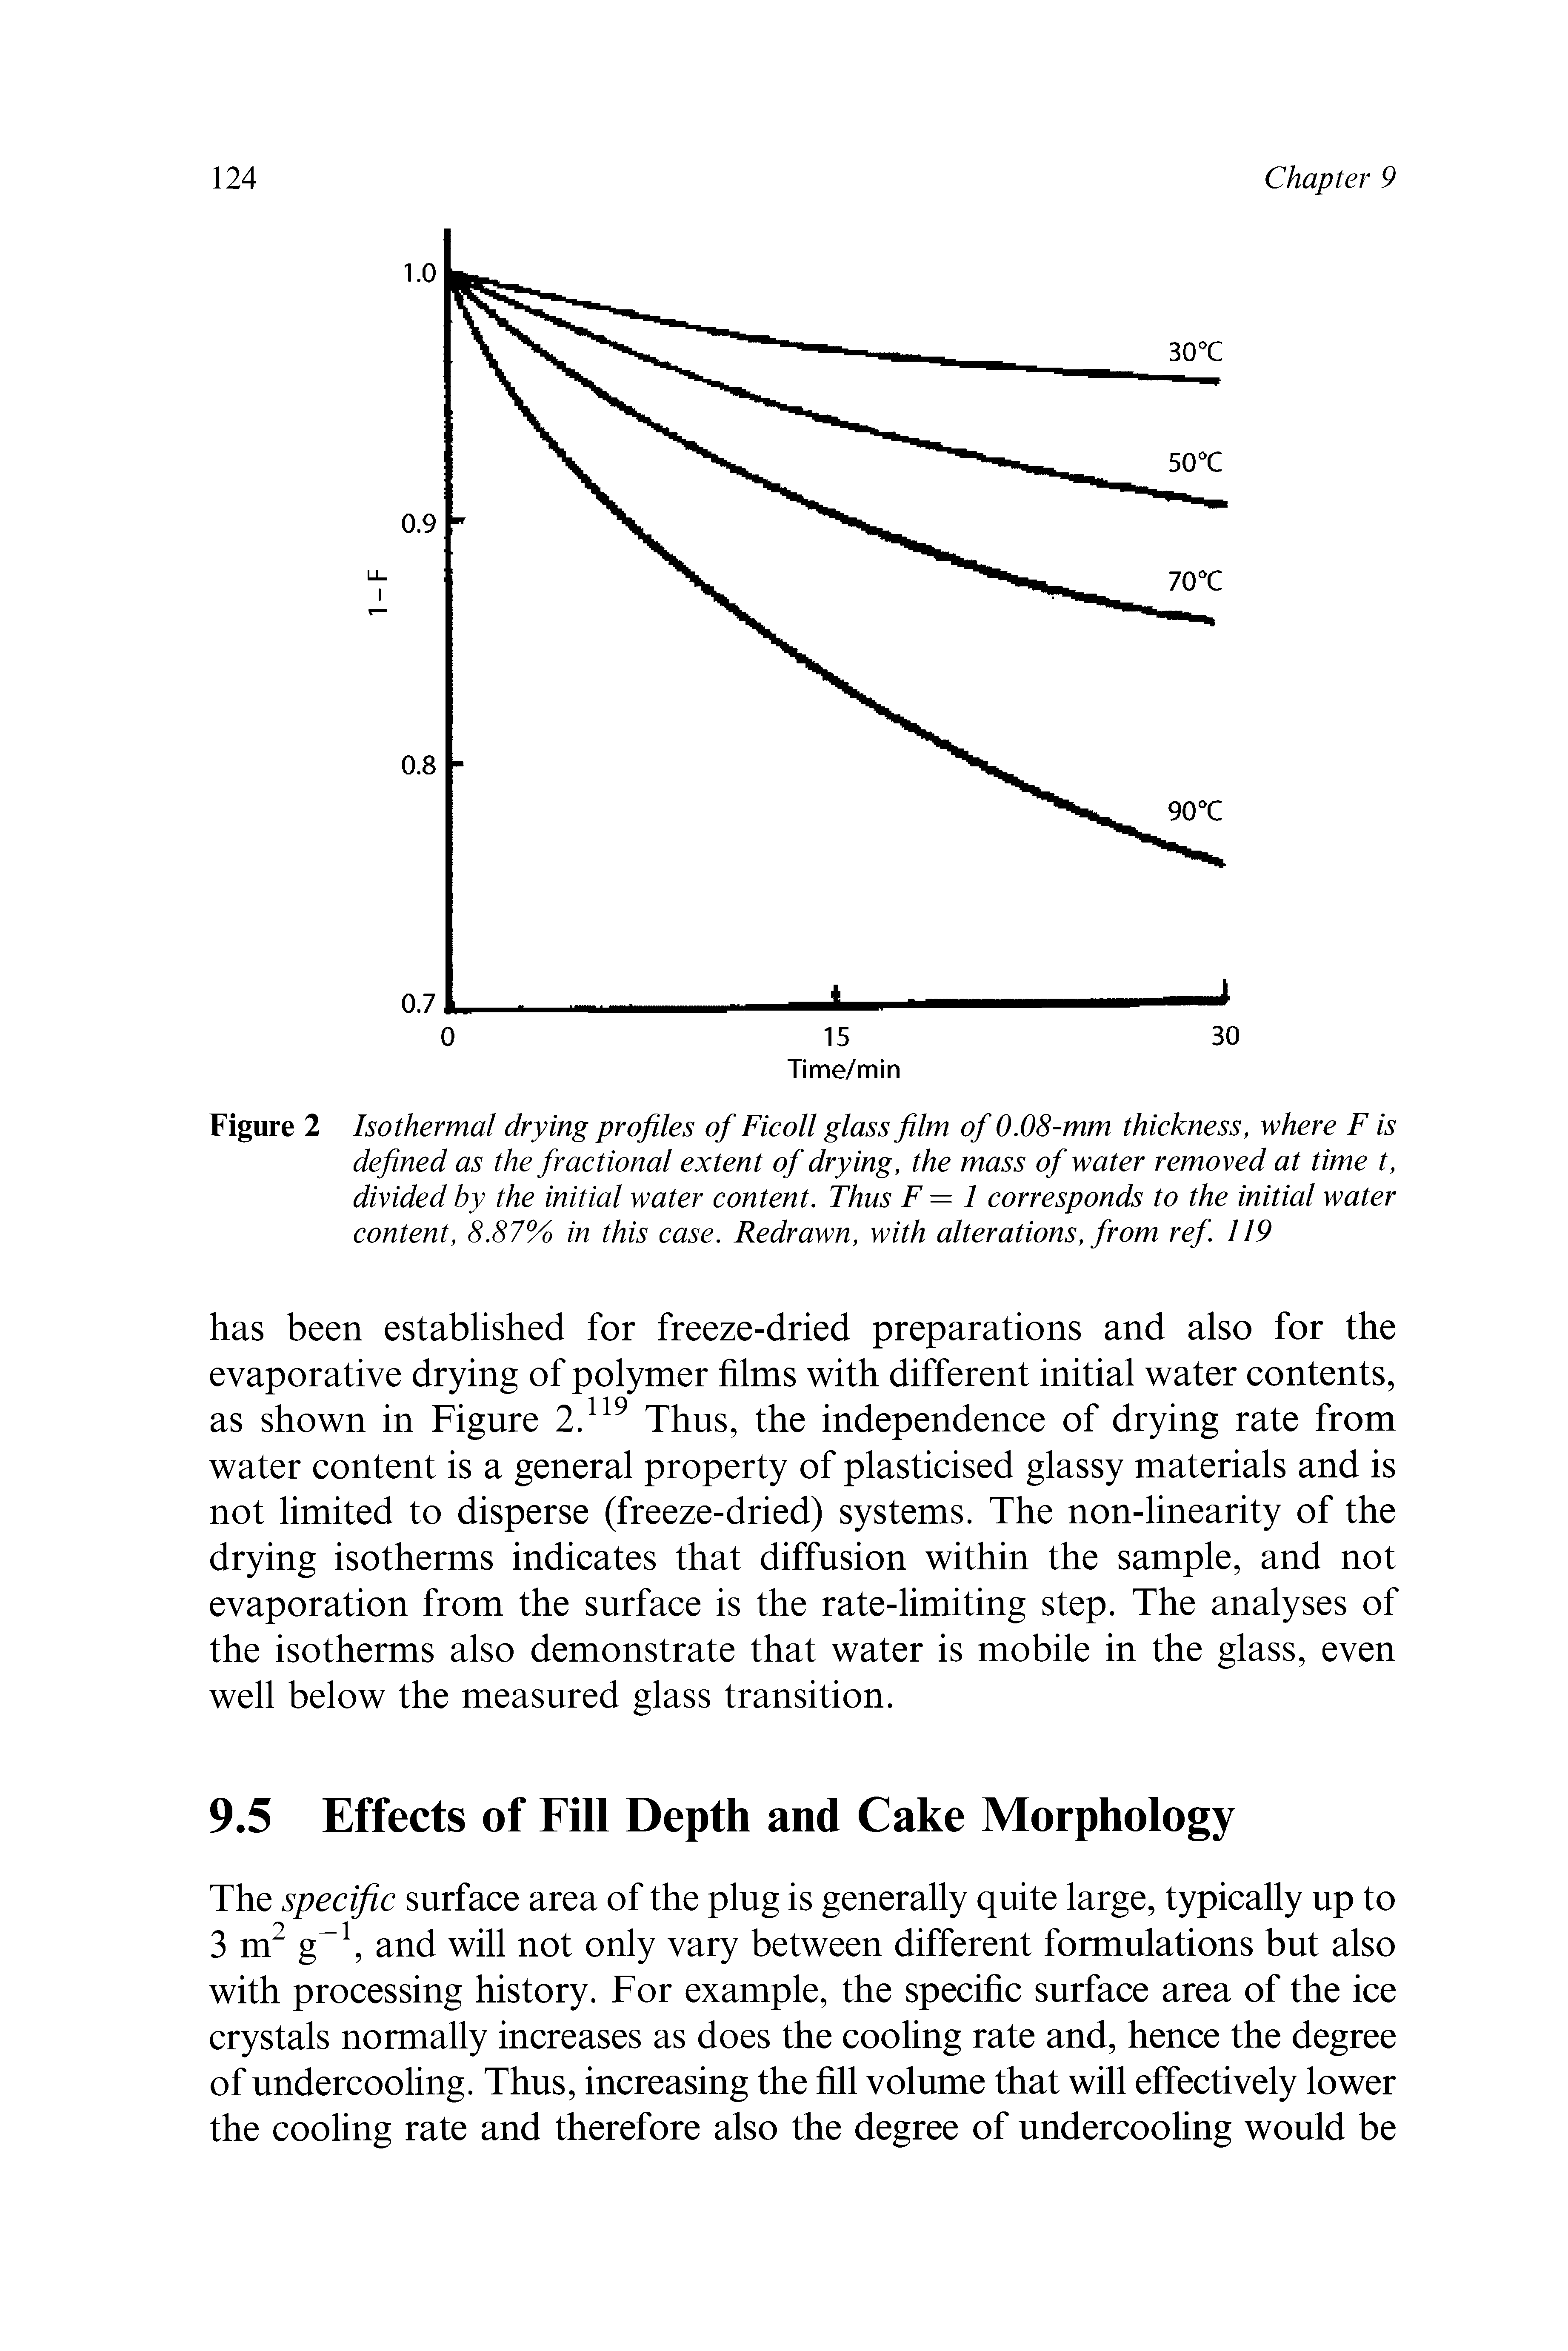 Figure 2 Isothermal drying profiles of Ficoll glass film of 0.08-mm thickness, where F is defined as the fractional extent of drying, the mass of water removed at time t, divided by the initial water content. Thus F = 1 corresponds to the initial water content, 8.87% in this case. Redrawn, with alterations, from ref. 119...